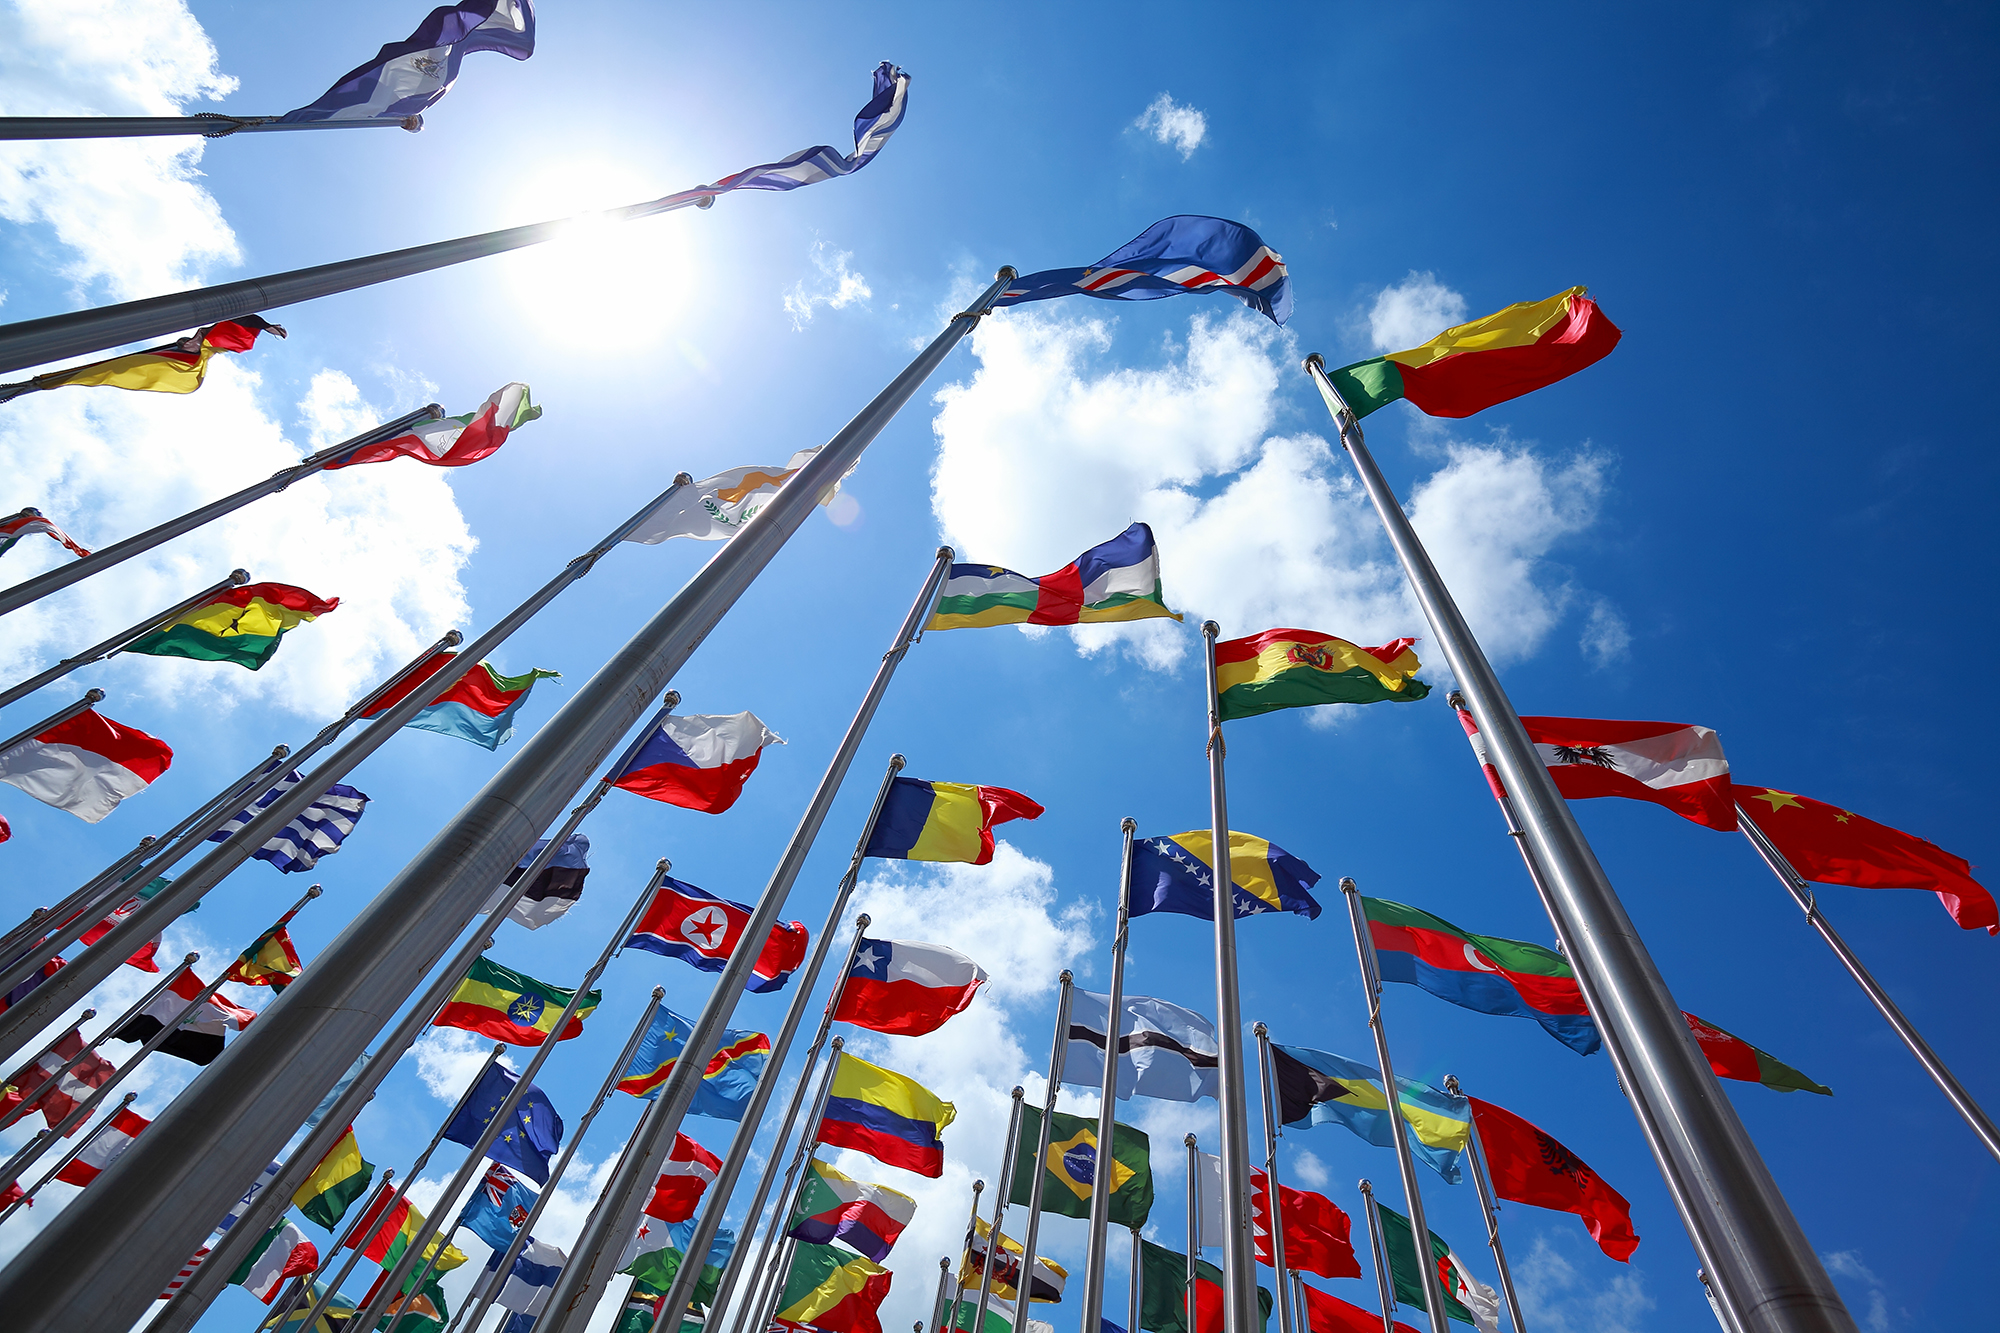 MiTek's Global Reach and Scale - A large number of flagpoles with flags from different nations